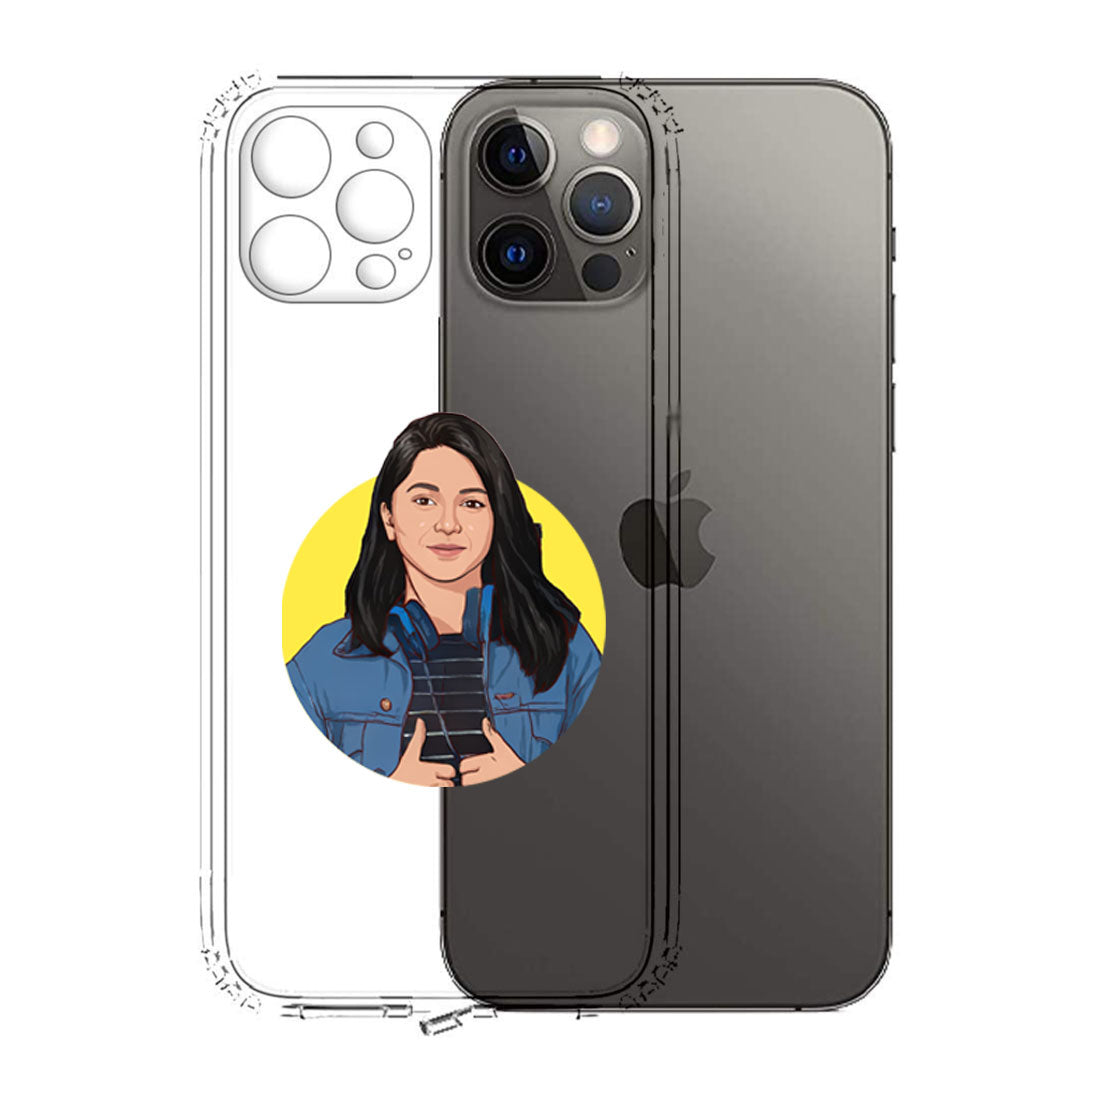 IPhone 11 Back Cover with Photo TPU Flexible Clear Cases